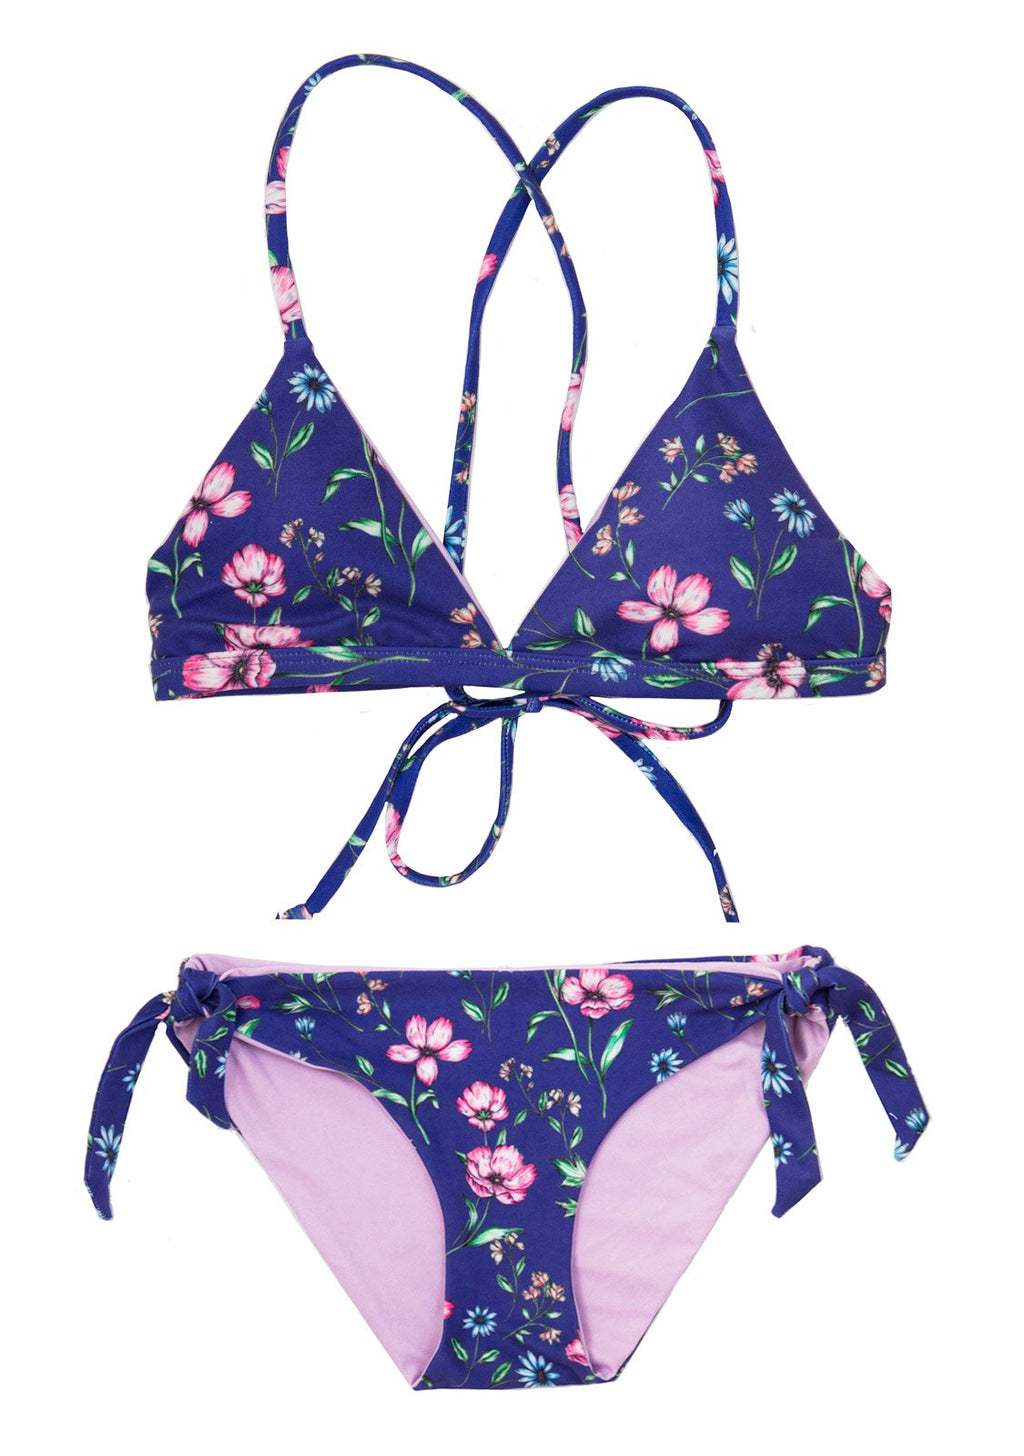 https://chanceloves.com/cdn/shop/products/violetta-bikini-2-piece-set-for-girls-with-triangle-top-2-piece-youth-bikini-set-chance-loves-girls-10-294460.jpg?v=1615923630&width=1024